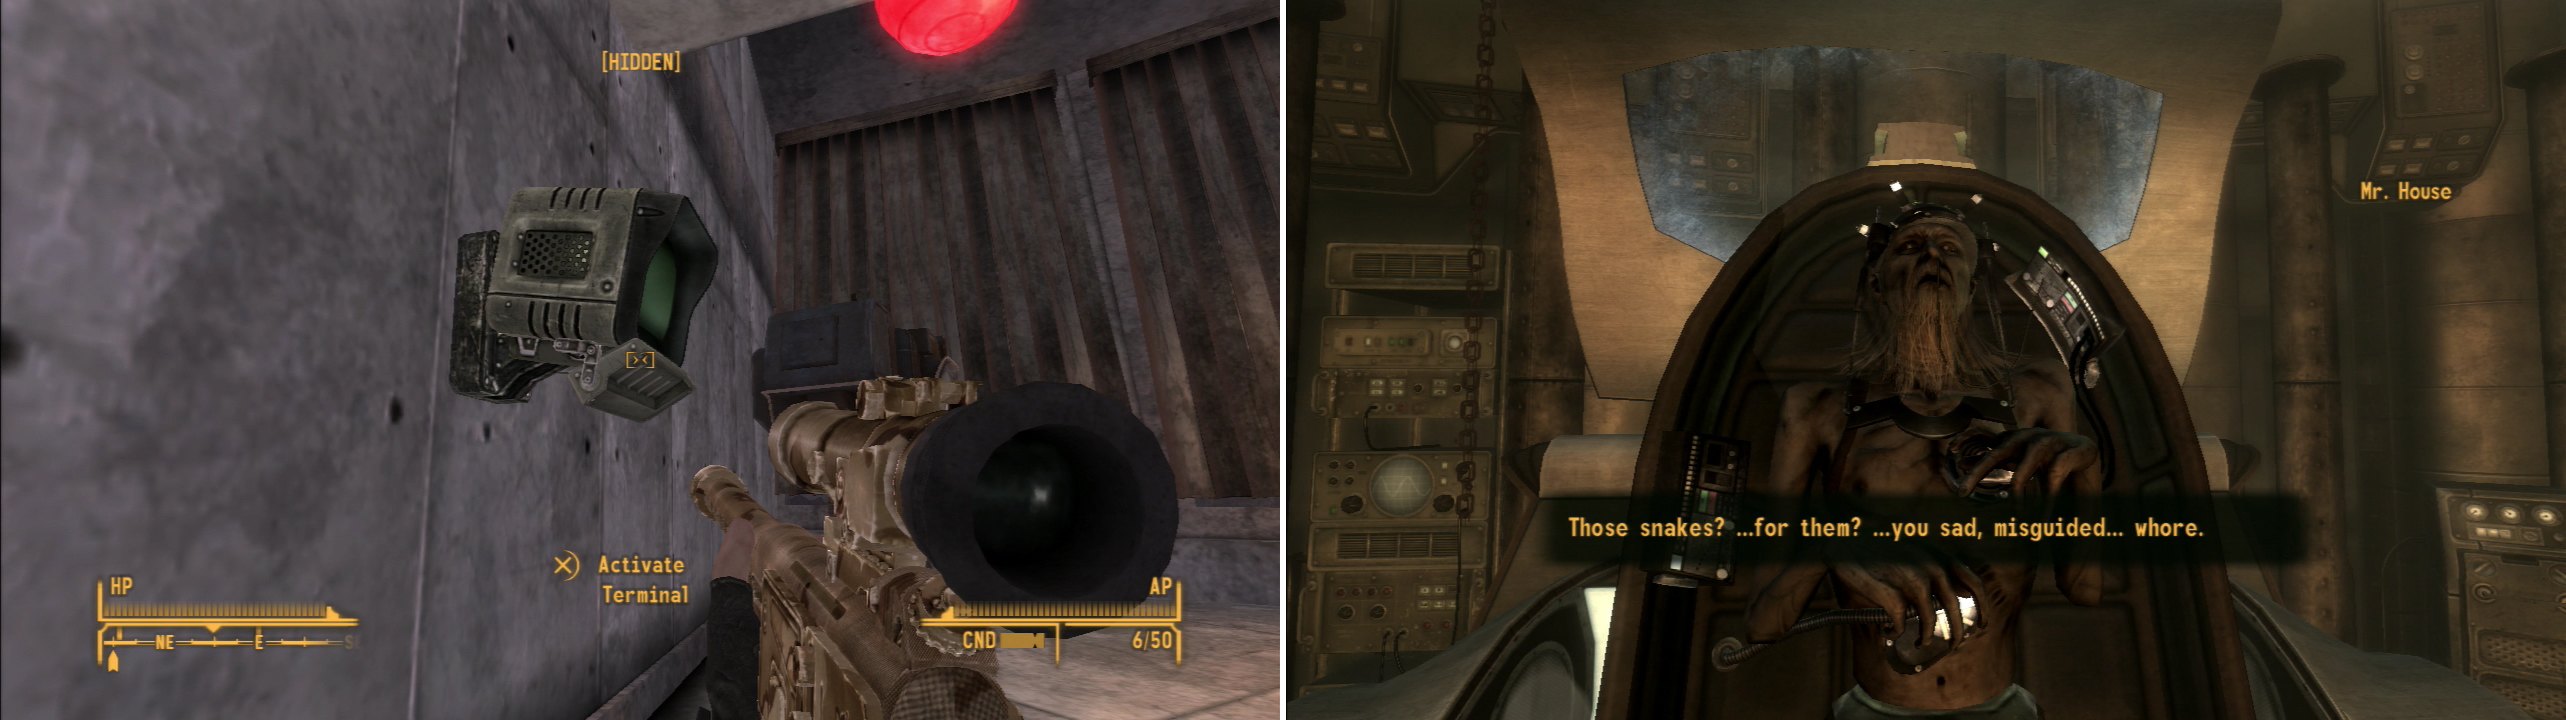 Break into Mr. House’s antechamber by using the Terminals in his Penthouse (left). Confronted, Mr. House has some… unkind words for you and the NCR (right).